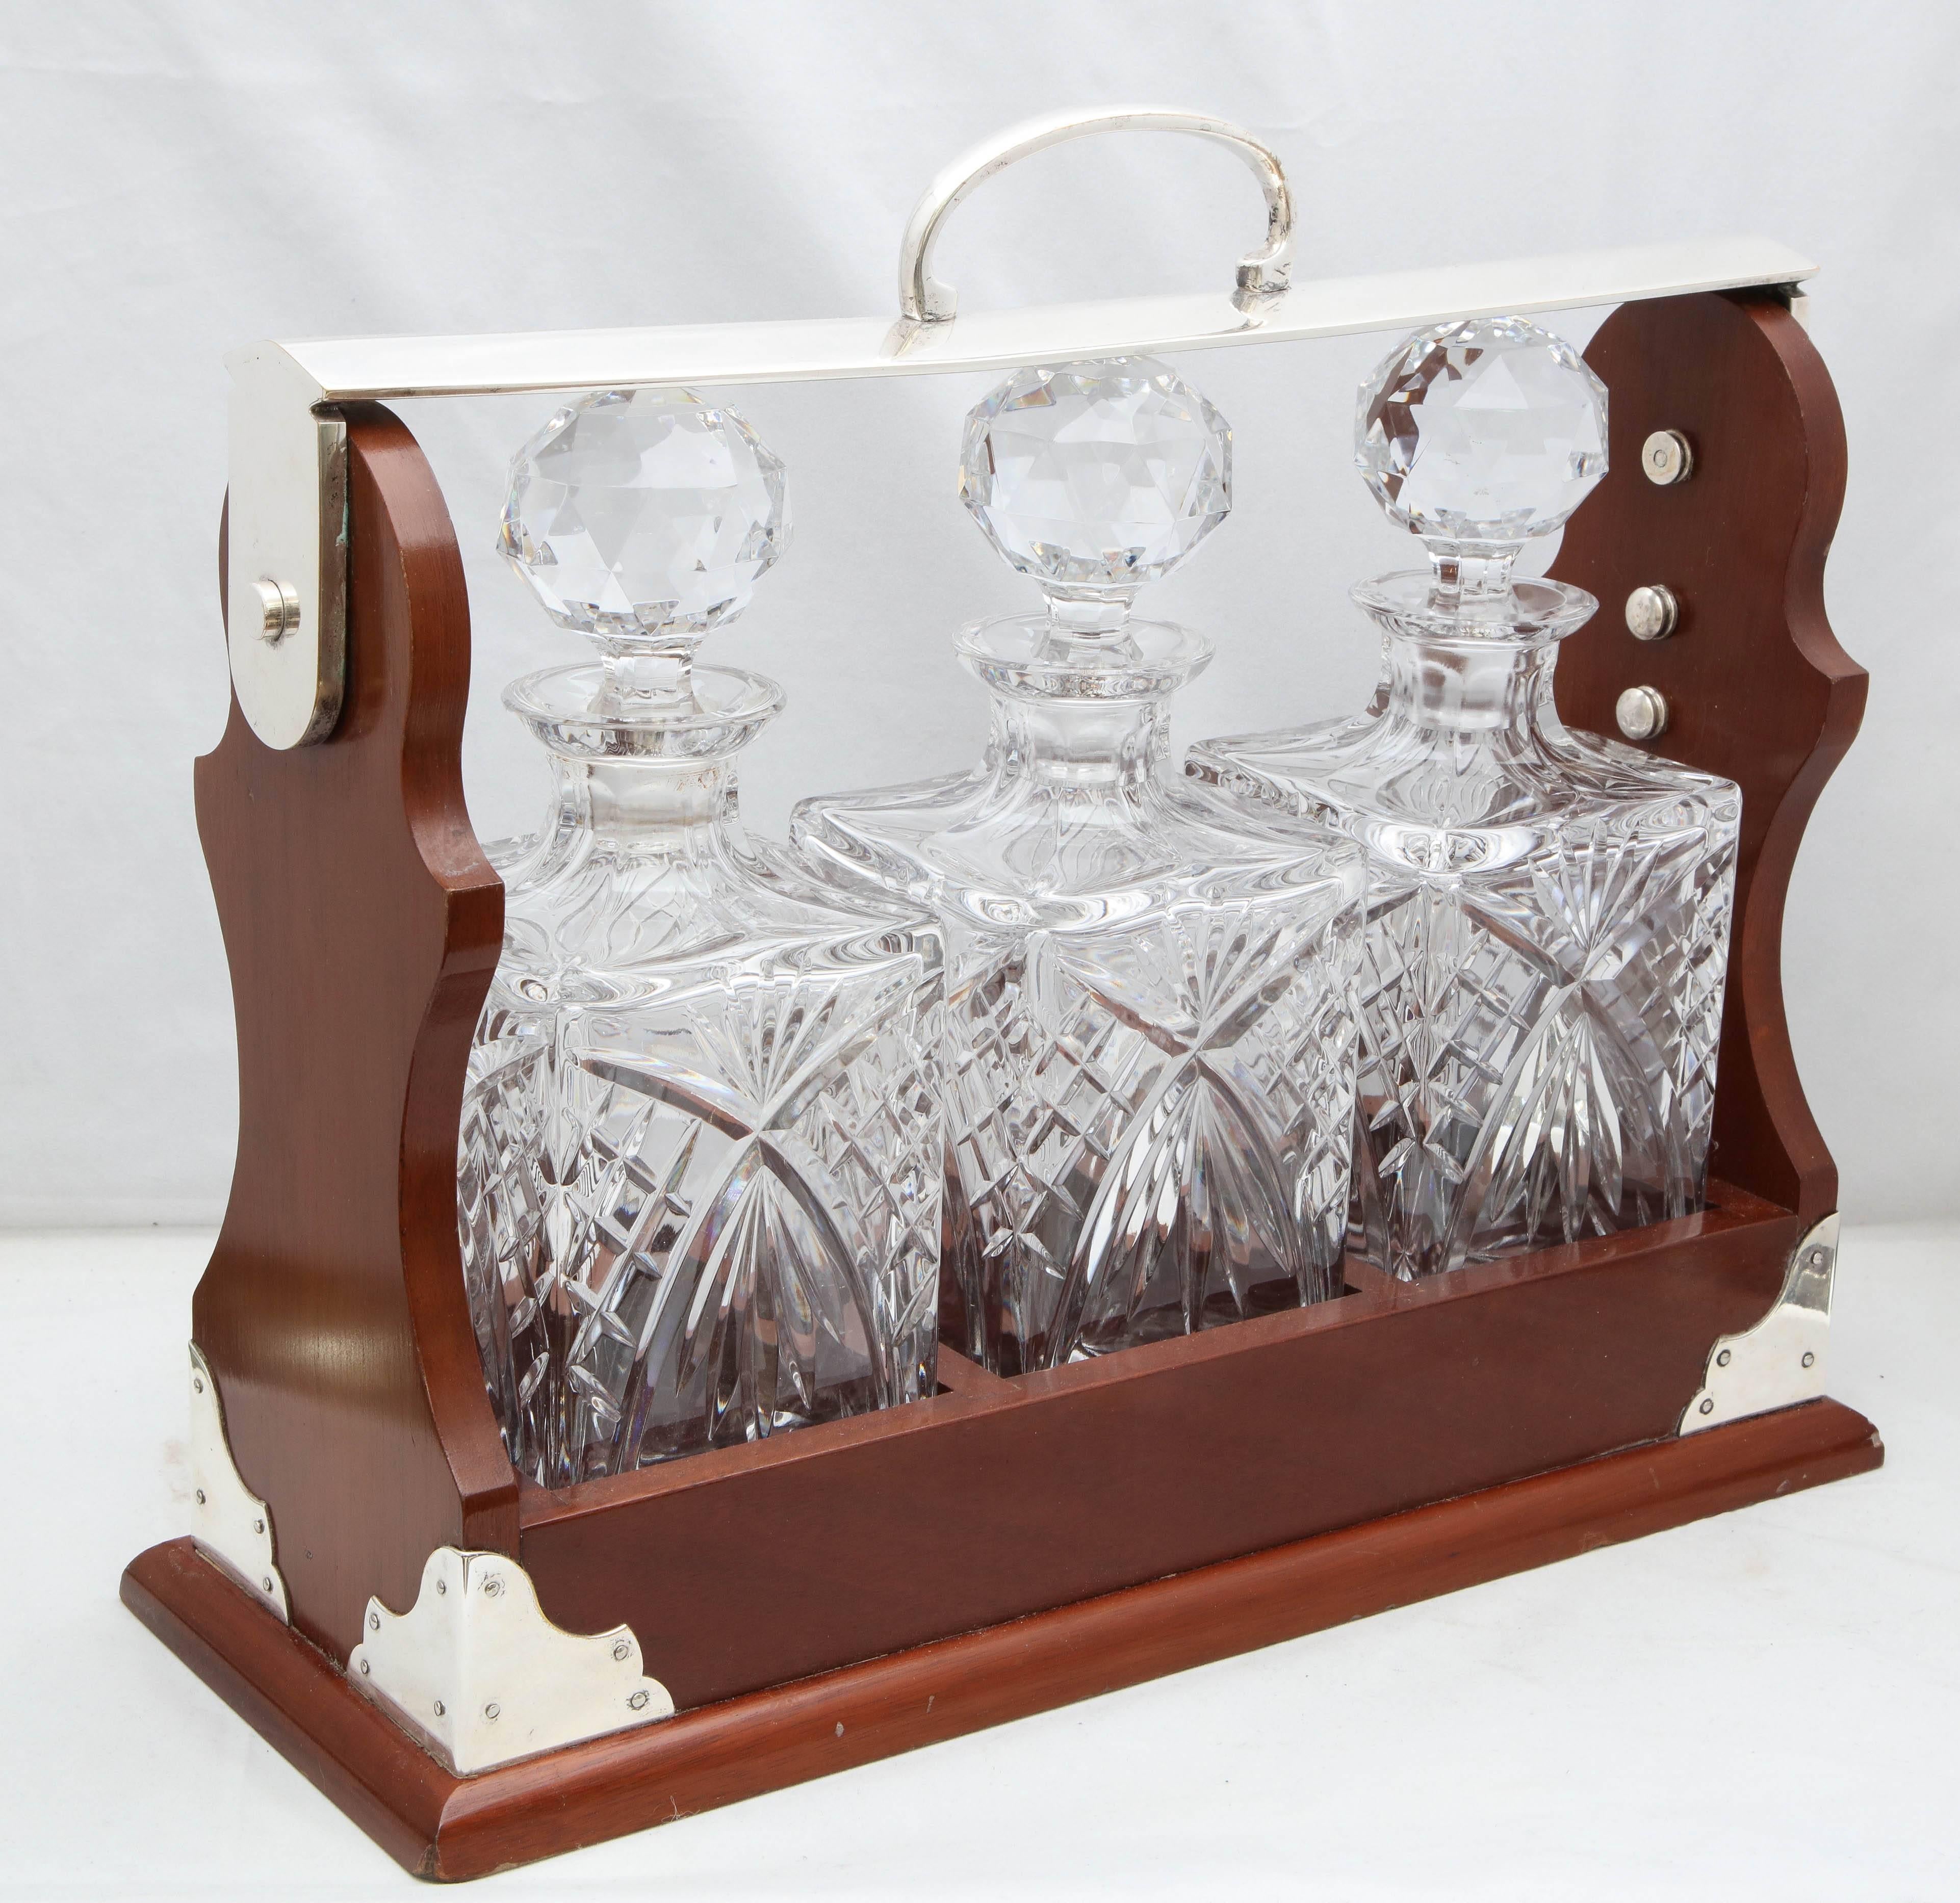 Edwardian, silver plate mounted wood, three decanter Tantalus, England, circa 1905. Case measures 15 inches wide x 6 inches deep x 13 1/4 inches high to top of handle. Each glass decanter measures 10 1/2 inches to top of stopper x 3 3/4 inches wide